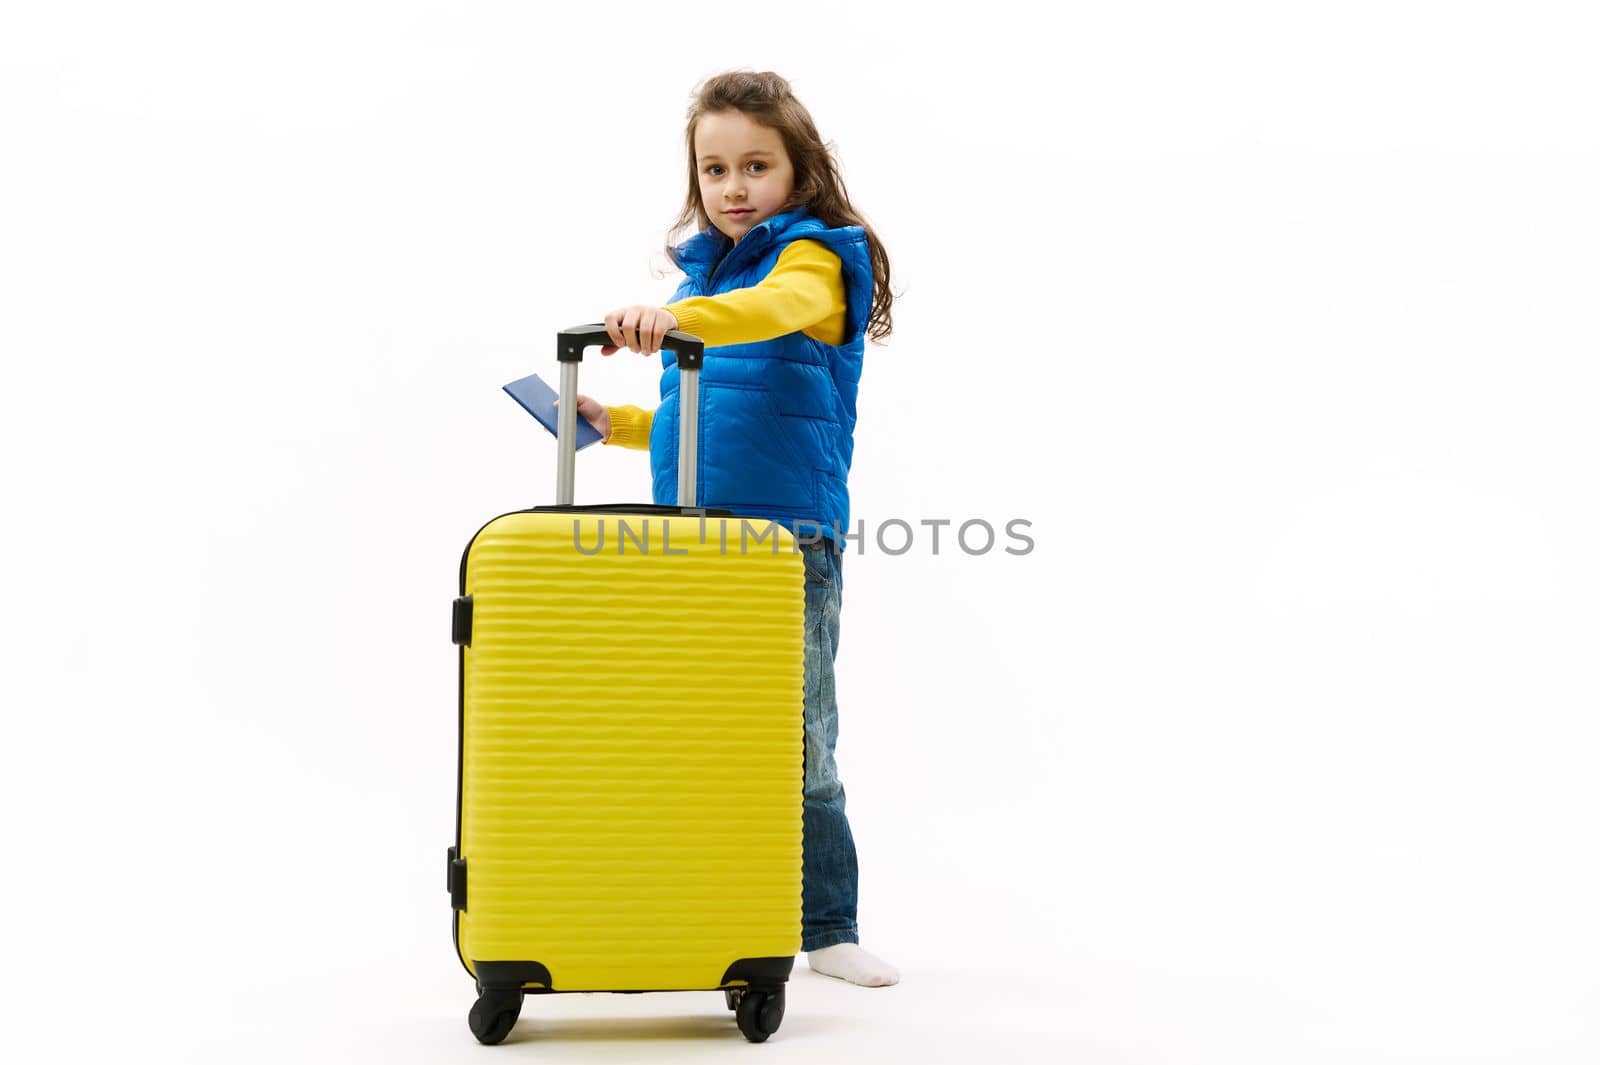 Full size traveler little child girl, in blue jacket, denim, holds a yellow suitcase and boarding pass, isolated on white background. Tourist travel abroad rest getaway Air flight trip journey concept